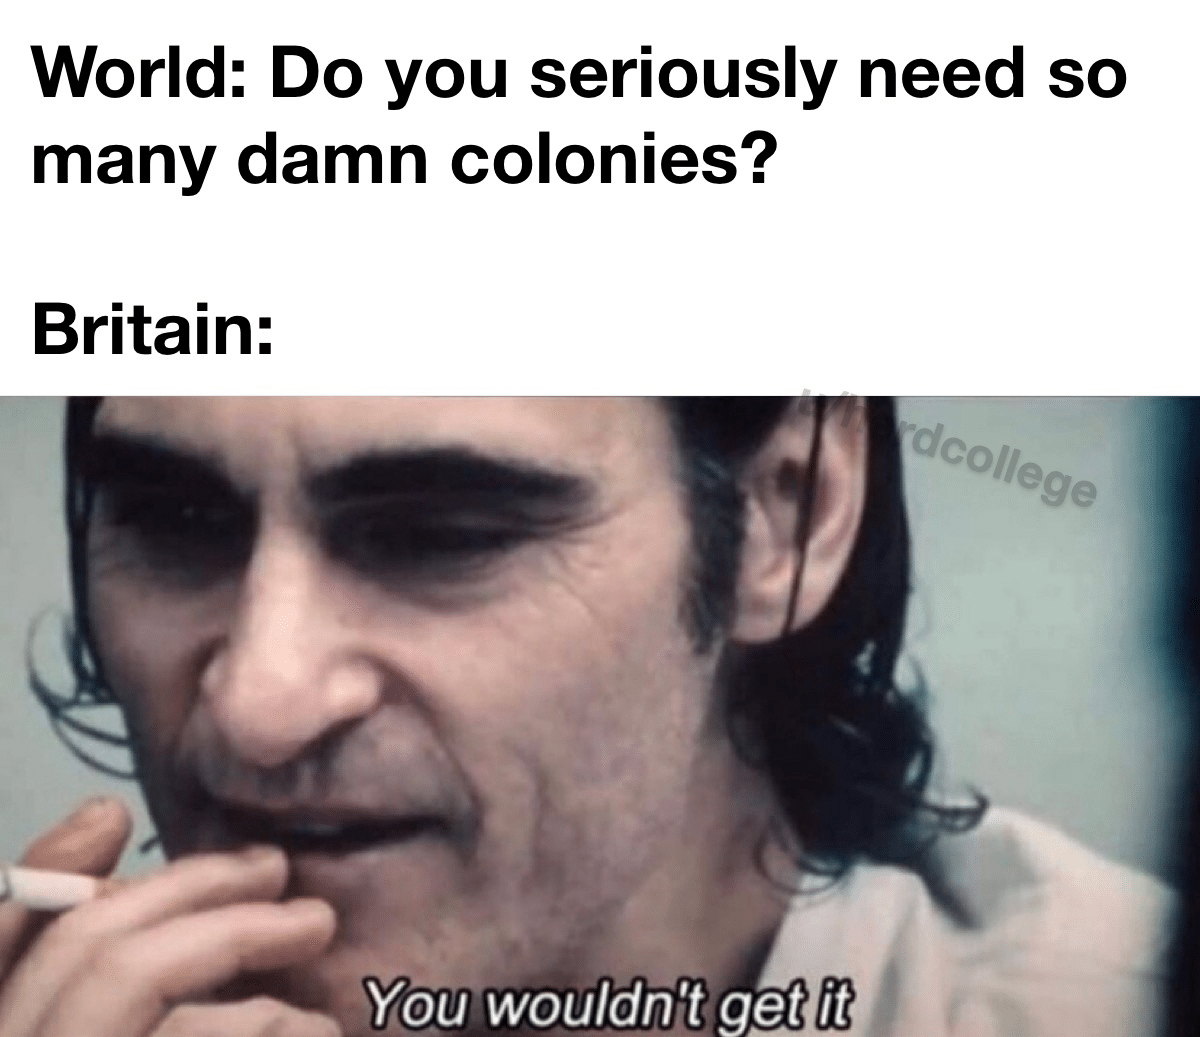 history history-memes history text: World: Do you seriously need so many damn colonies? Britain: 'You wouldn't get it 